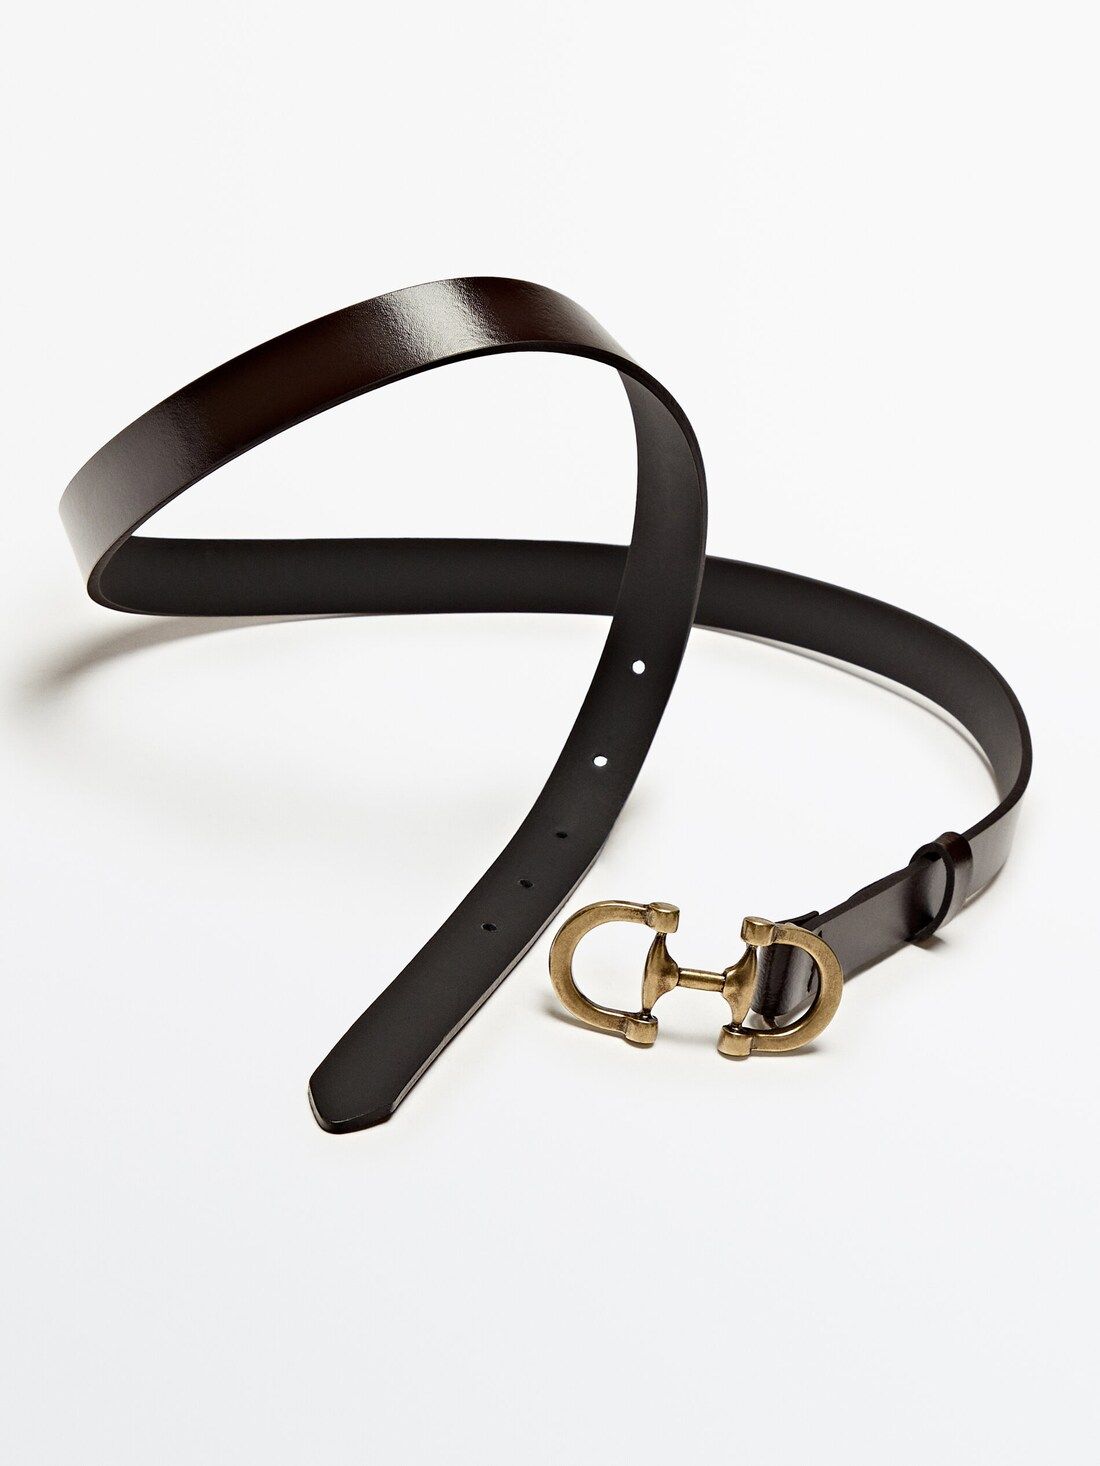 Leather belt with double buckle | Massimo Dutti (US)